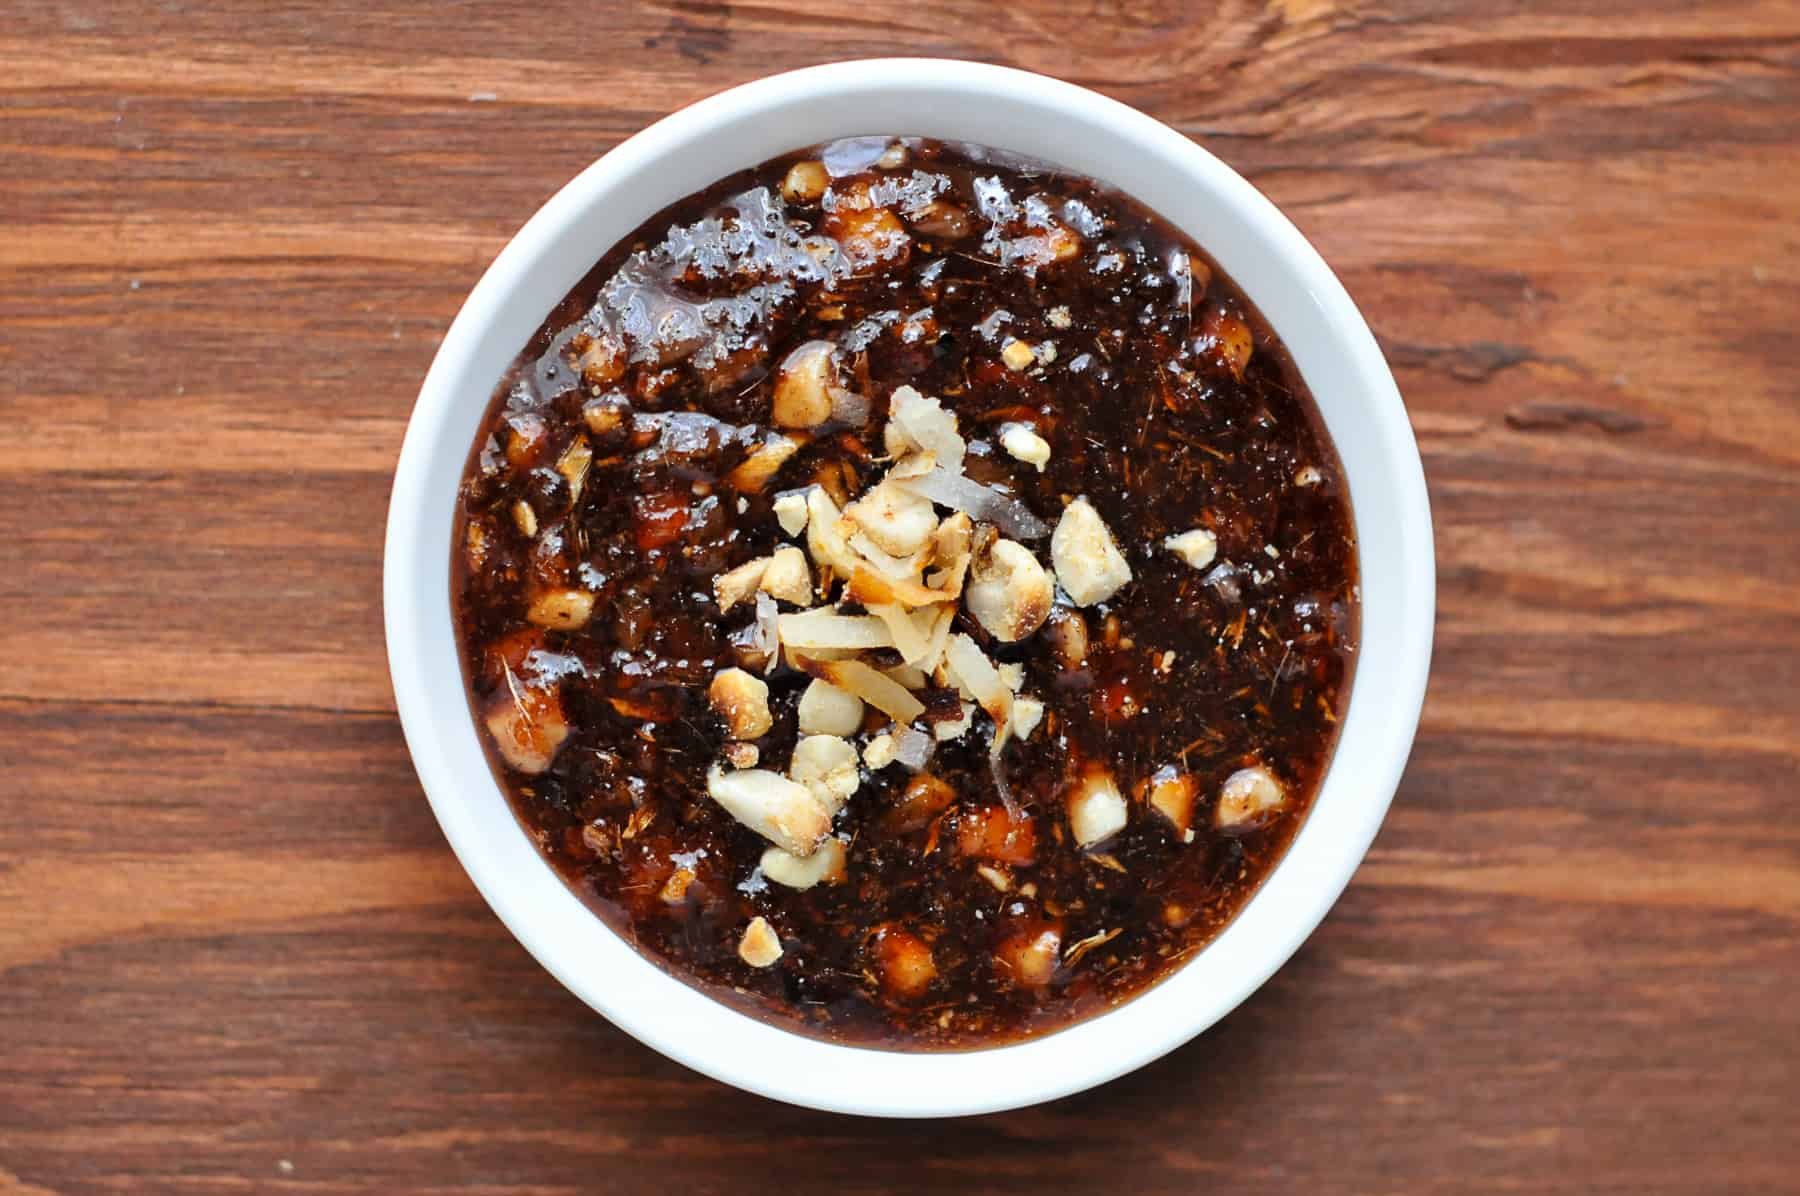 Cook the paste with palm sugar and fish sauce and top with toasted peanuts and toasted coconut flakes.